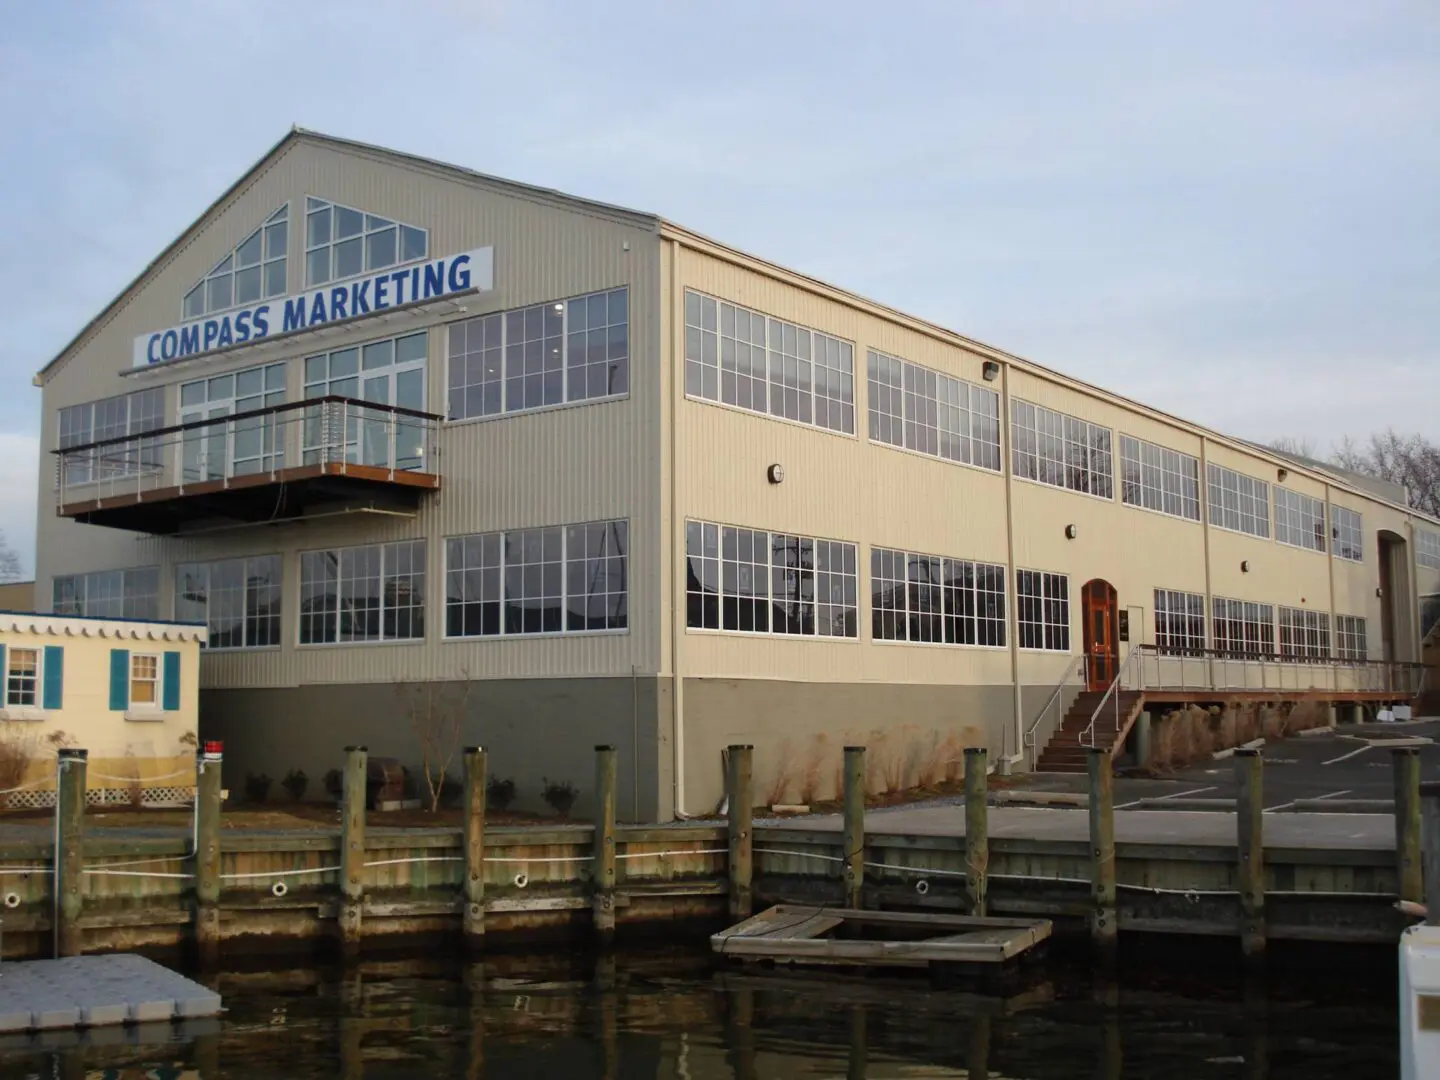 In 2007, The Big Shed, an old boat building structure on Spa Creek in Annapolis, is converted to Class A office space with a maritime flair.